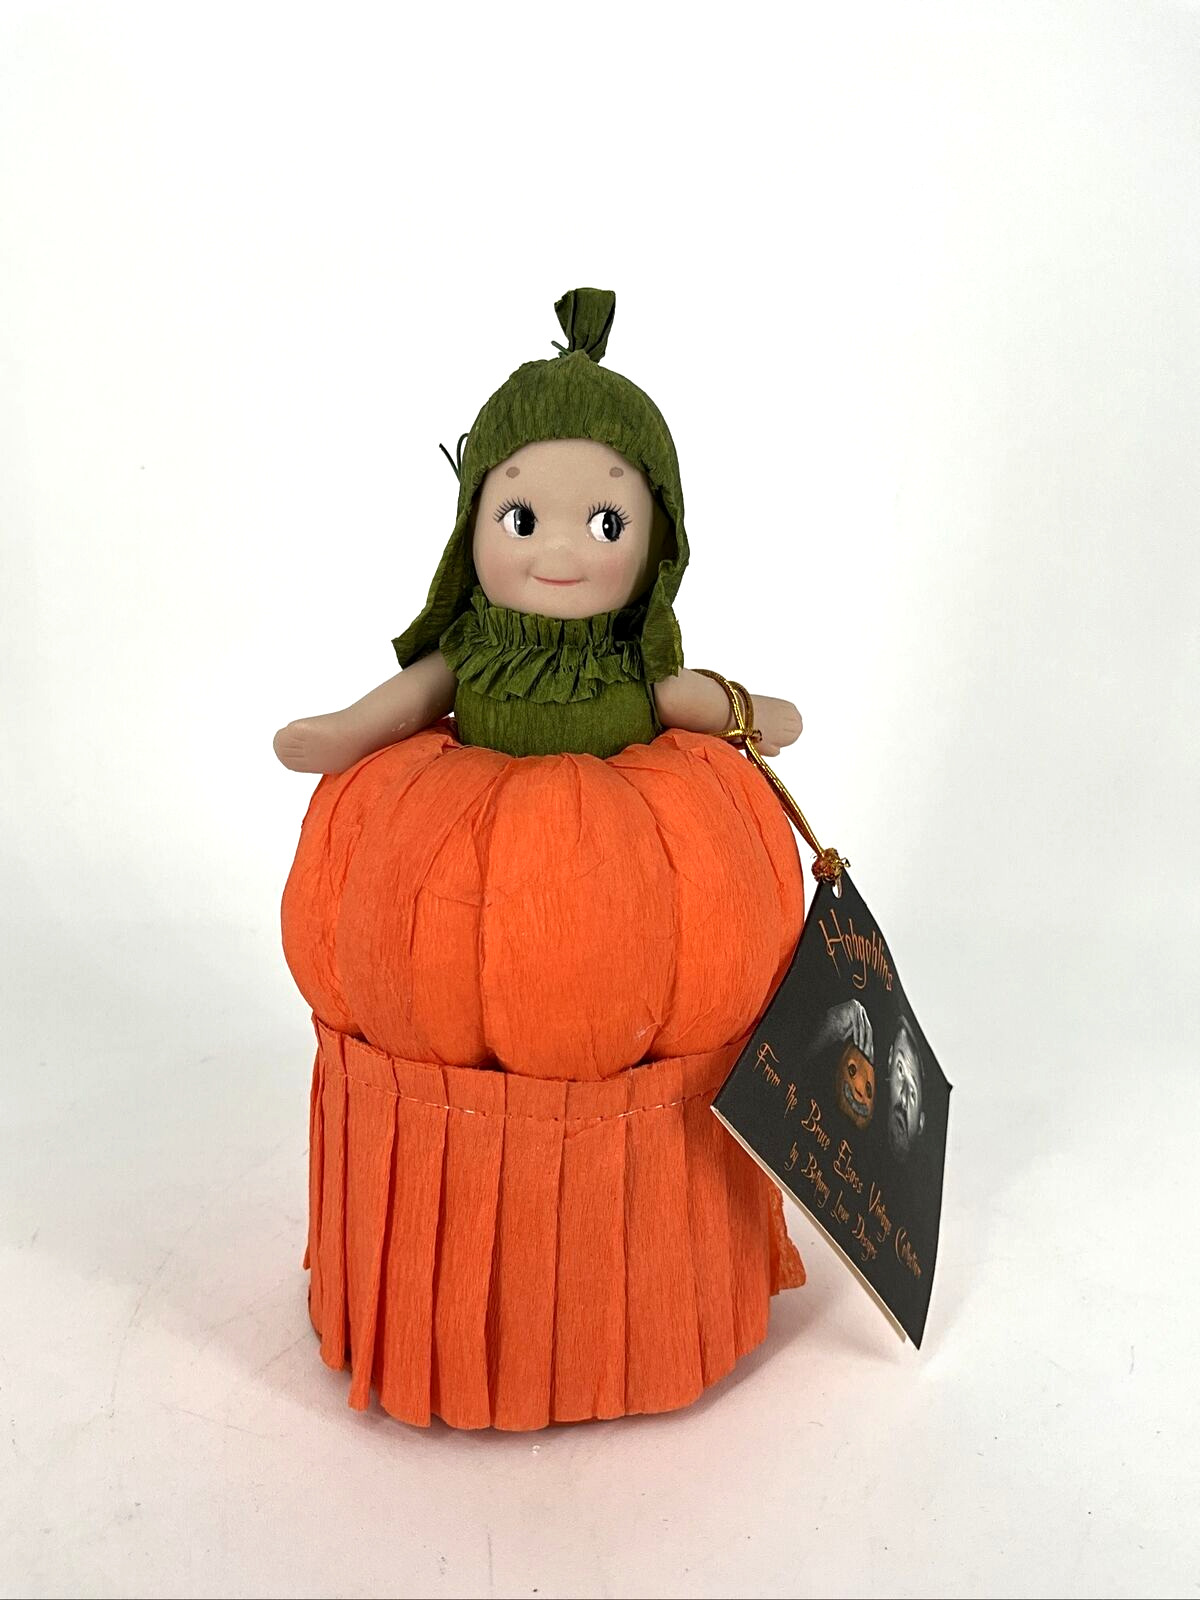 Bruce Elsass Bethany Lowe Halloween Hobgoblins tag Kewpie Doll Candy Container